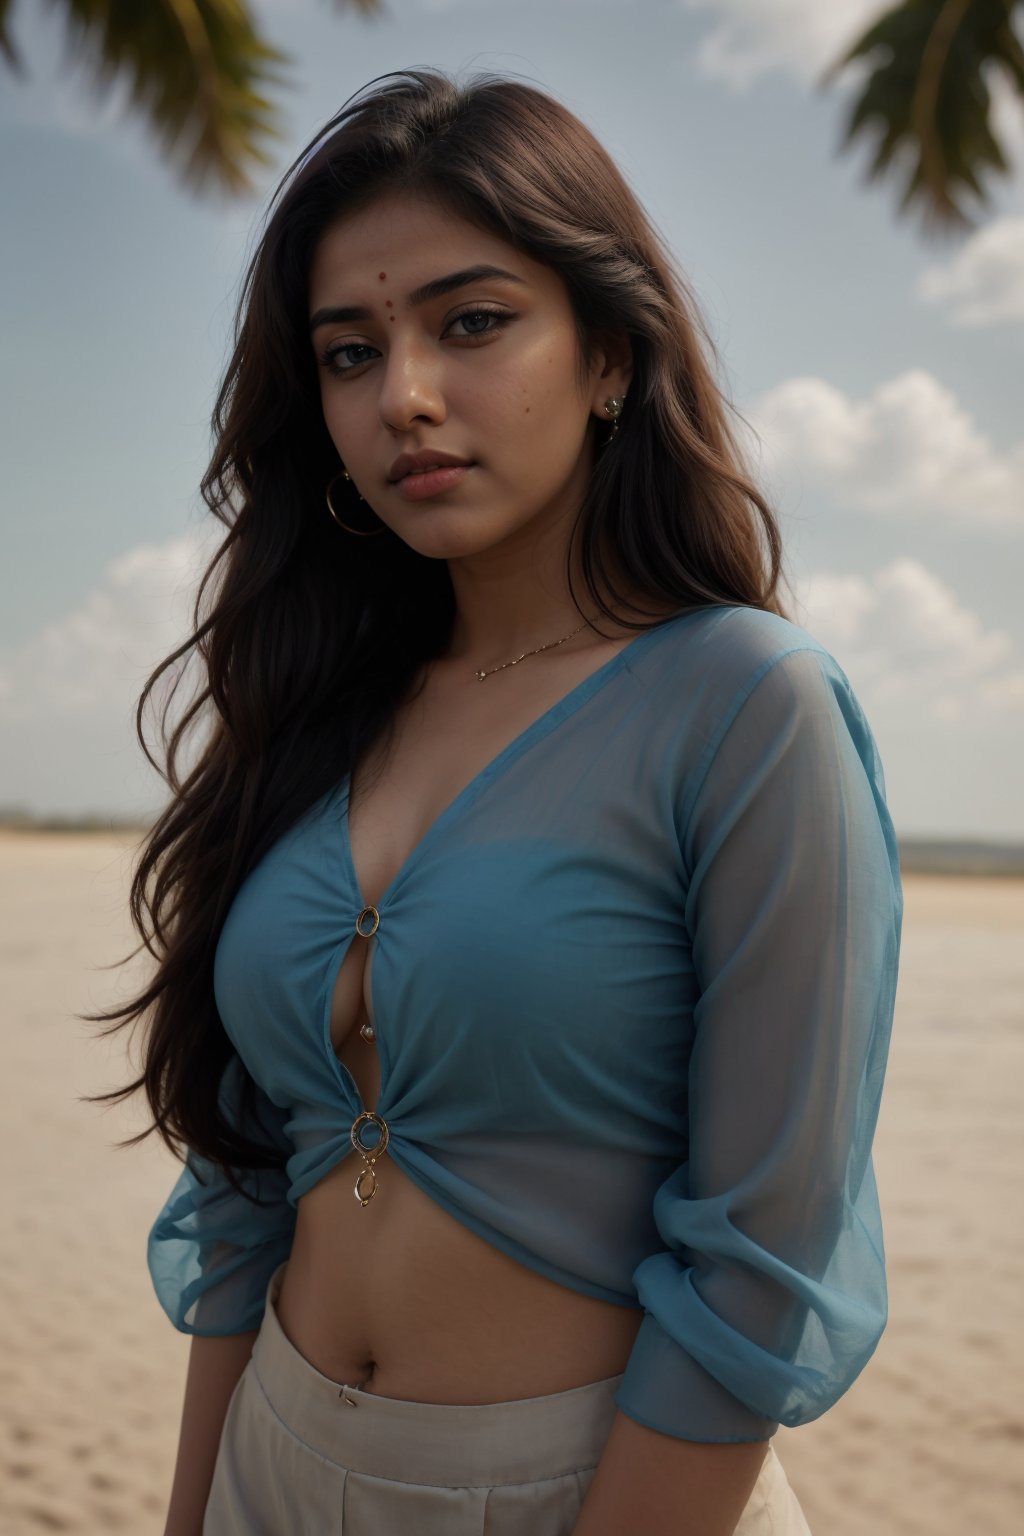 lovely cute young attractive indian girl, blue eyes, gorgeous actress, 21 years old, cute, an Instagram model, long hair, black hair, Indian, weaaring blouse, wearing bindi in forehead, ear rings,looking hot, under sunlight, looking on sky,27 year old girl ,Mallu 